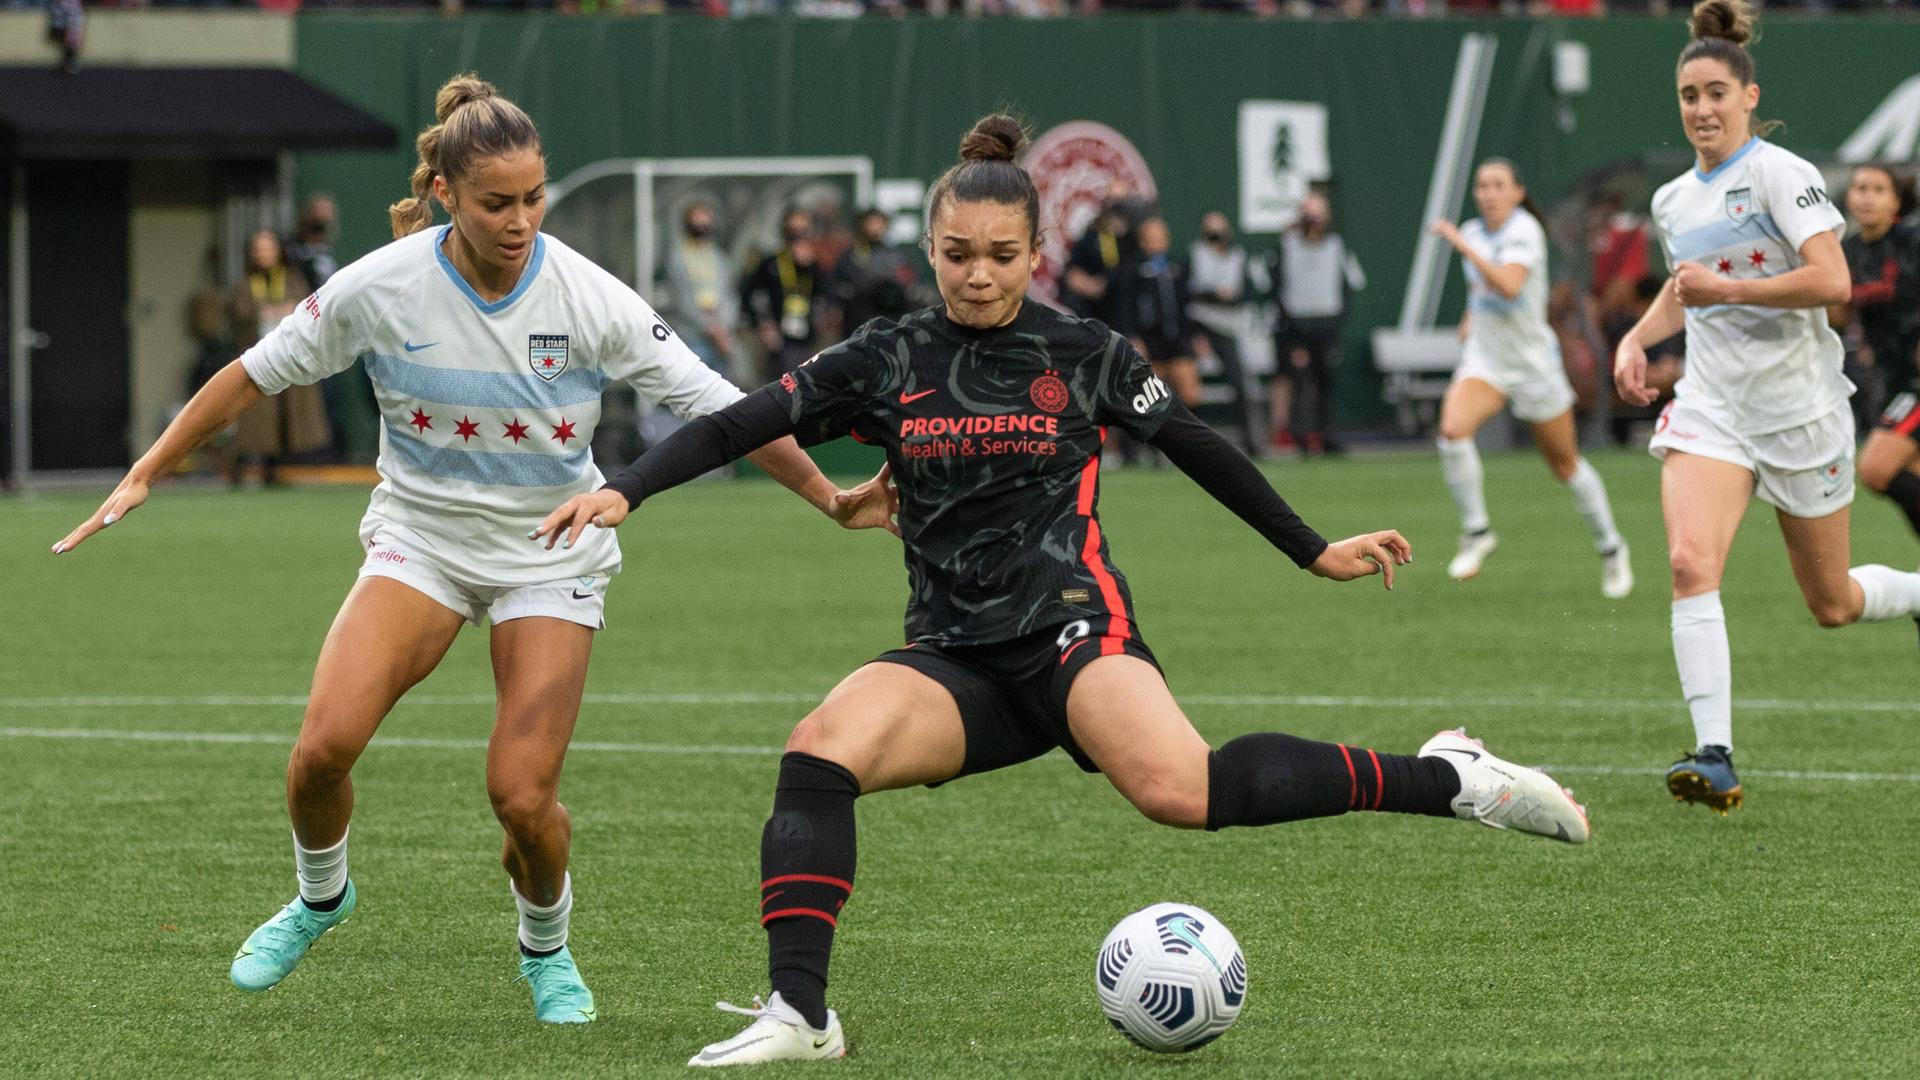 Portland, Oregon, November 14th during the Semi-Finals in the National Womens Soccer League game between Portland Thorns